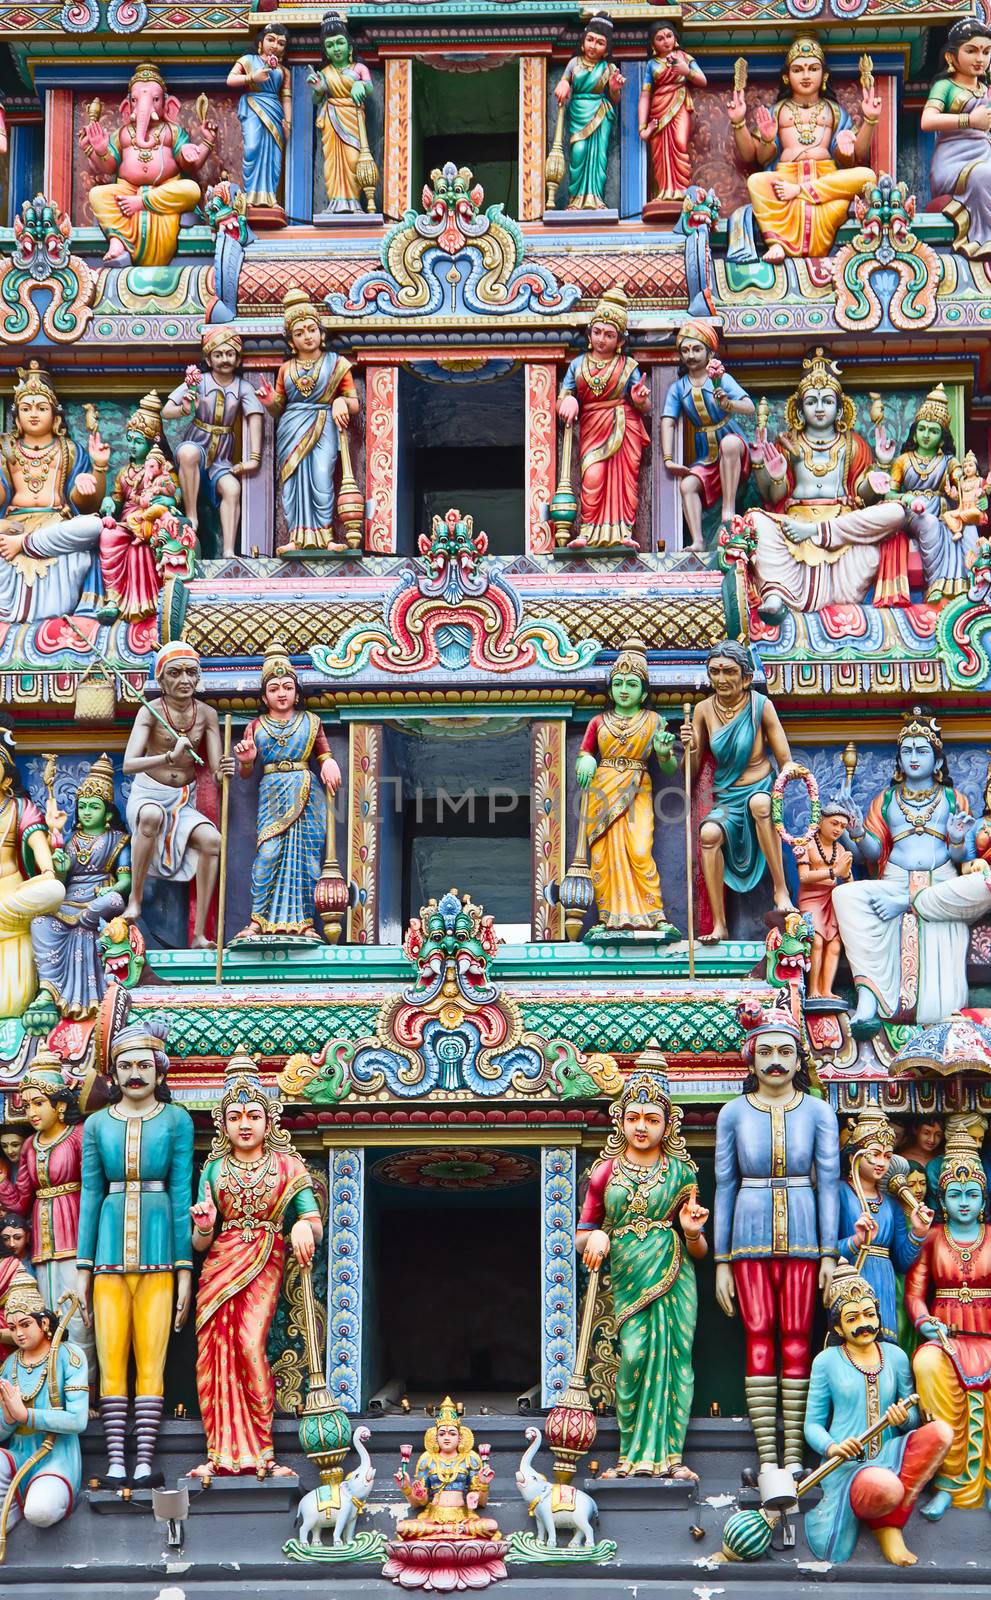 Hindu temple in Singapore by swisshippo